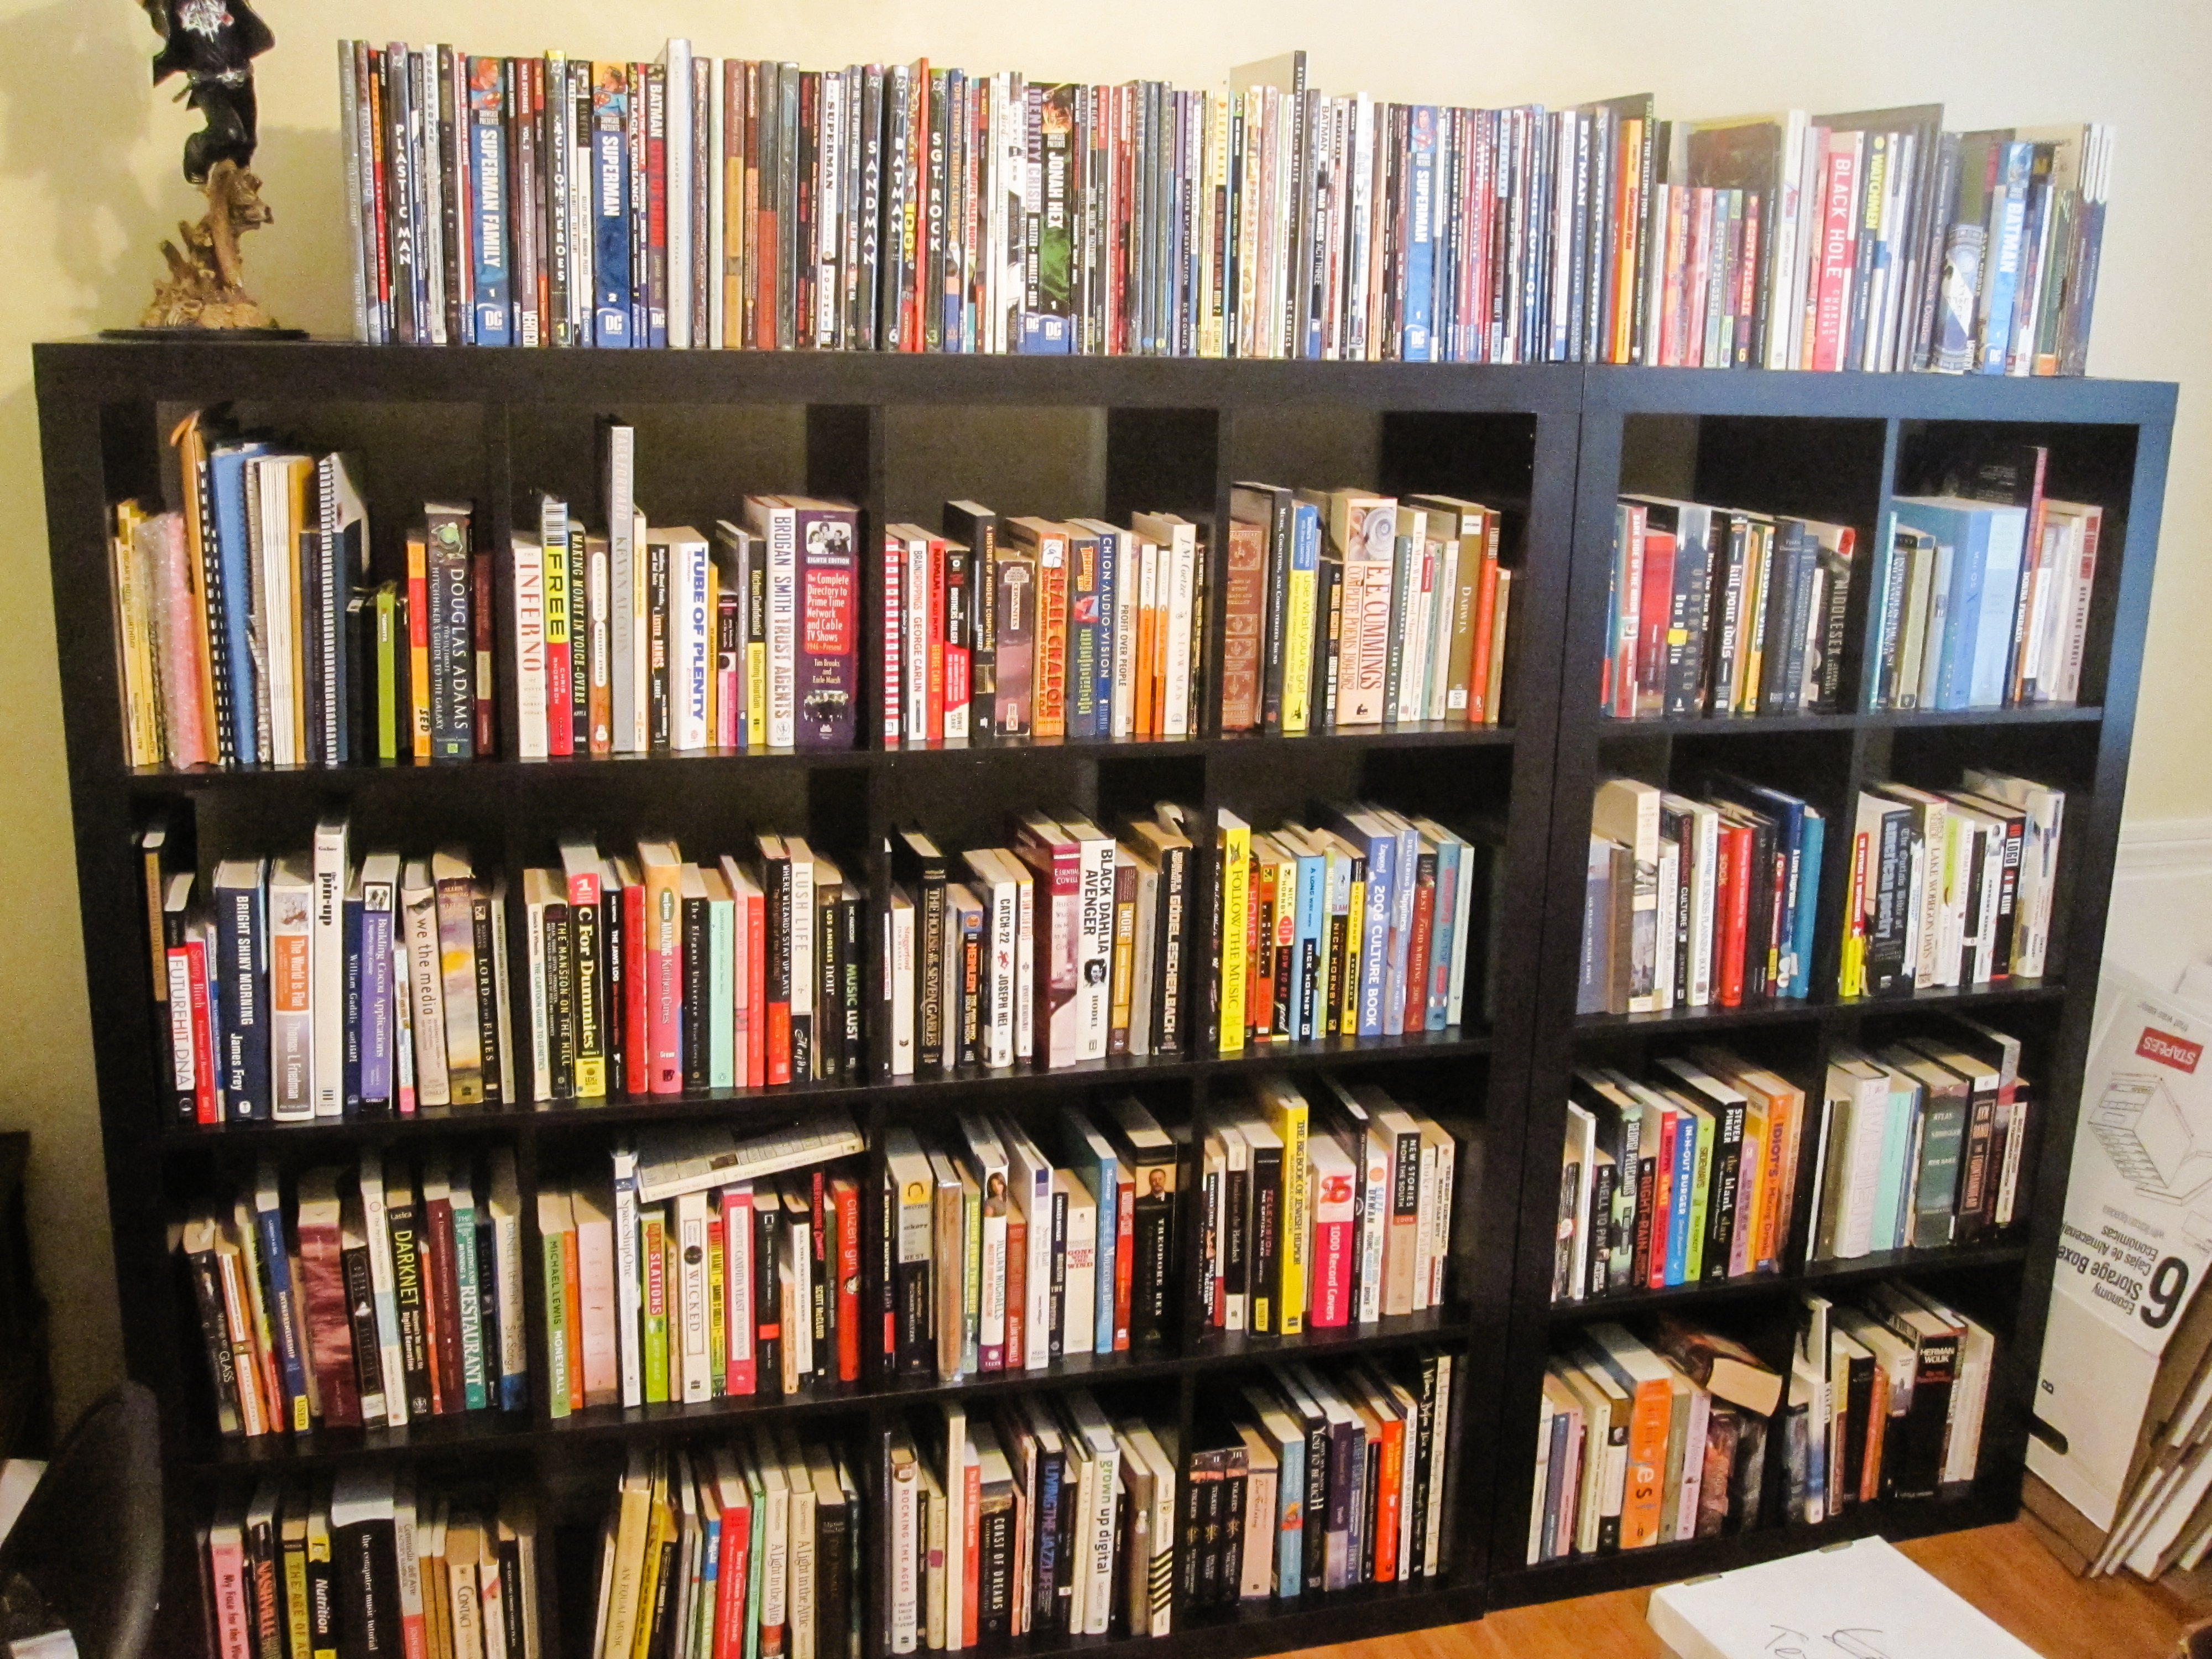 Going Digital or: How I learned to stop worrying and downsize my book collection